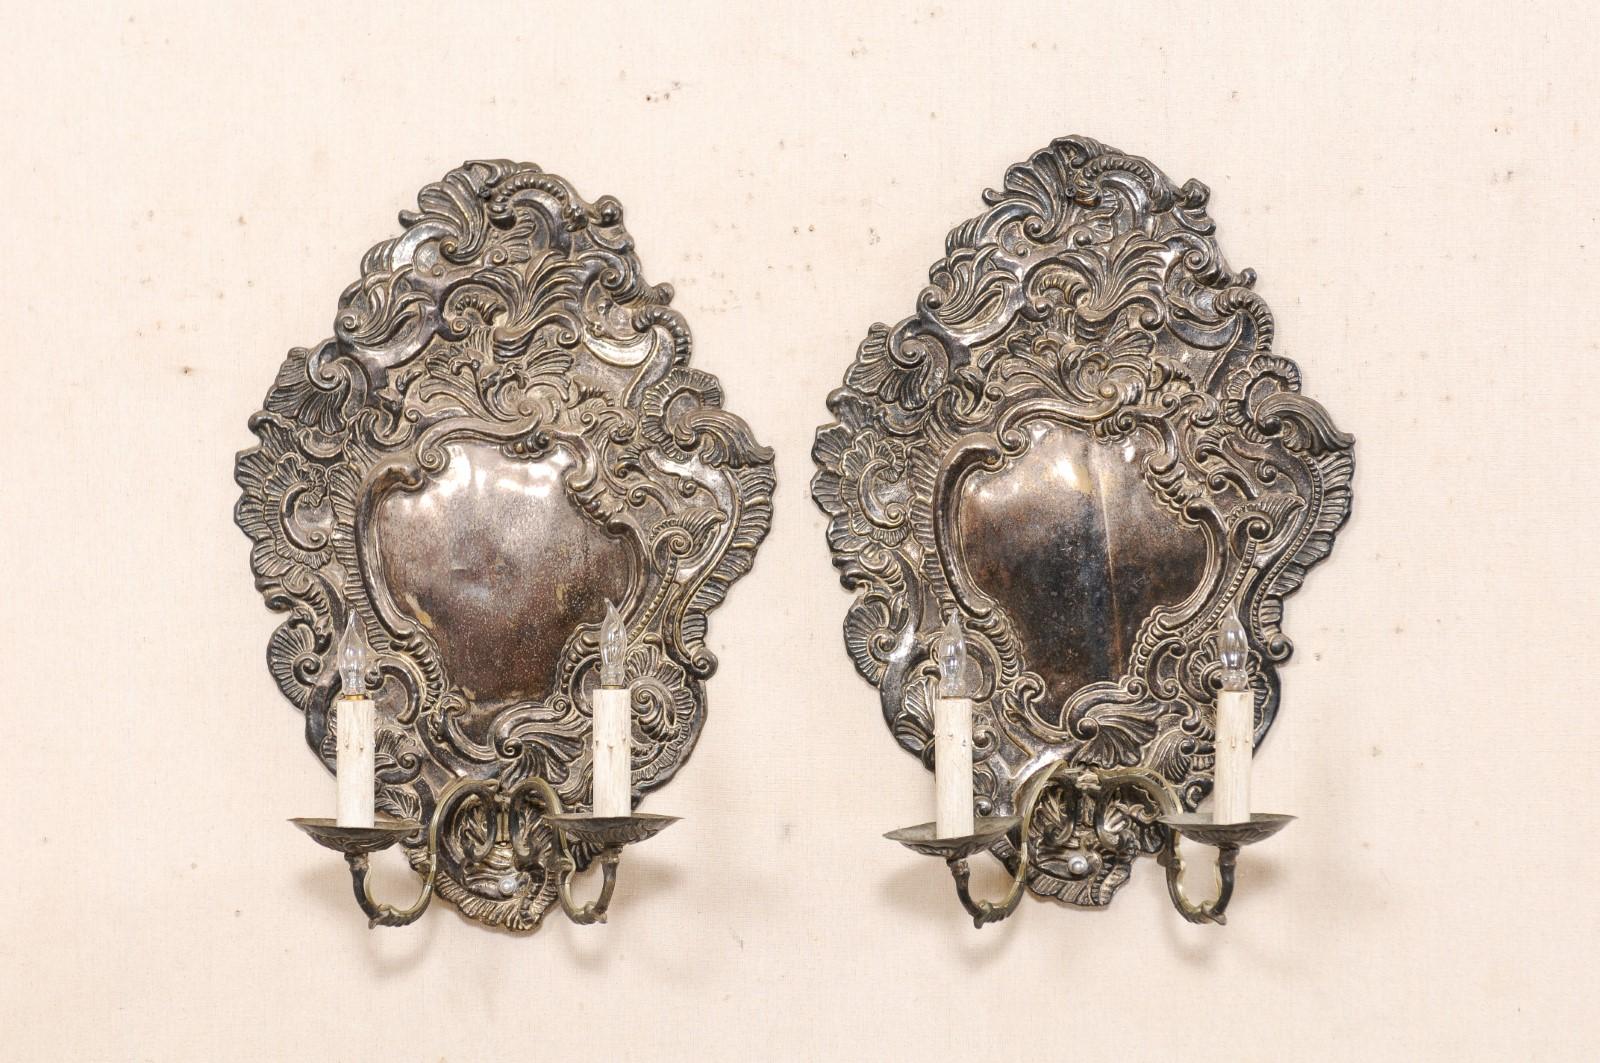 An Italian pair of Baroque style silver plated, two-light wall sconces from the 19th century. These antique wall lights from Italy each feature shapely back-plates in the elaborate Baroque design and swirling movement of stylized shells and foliate